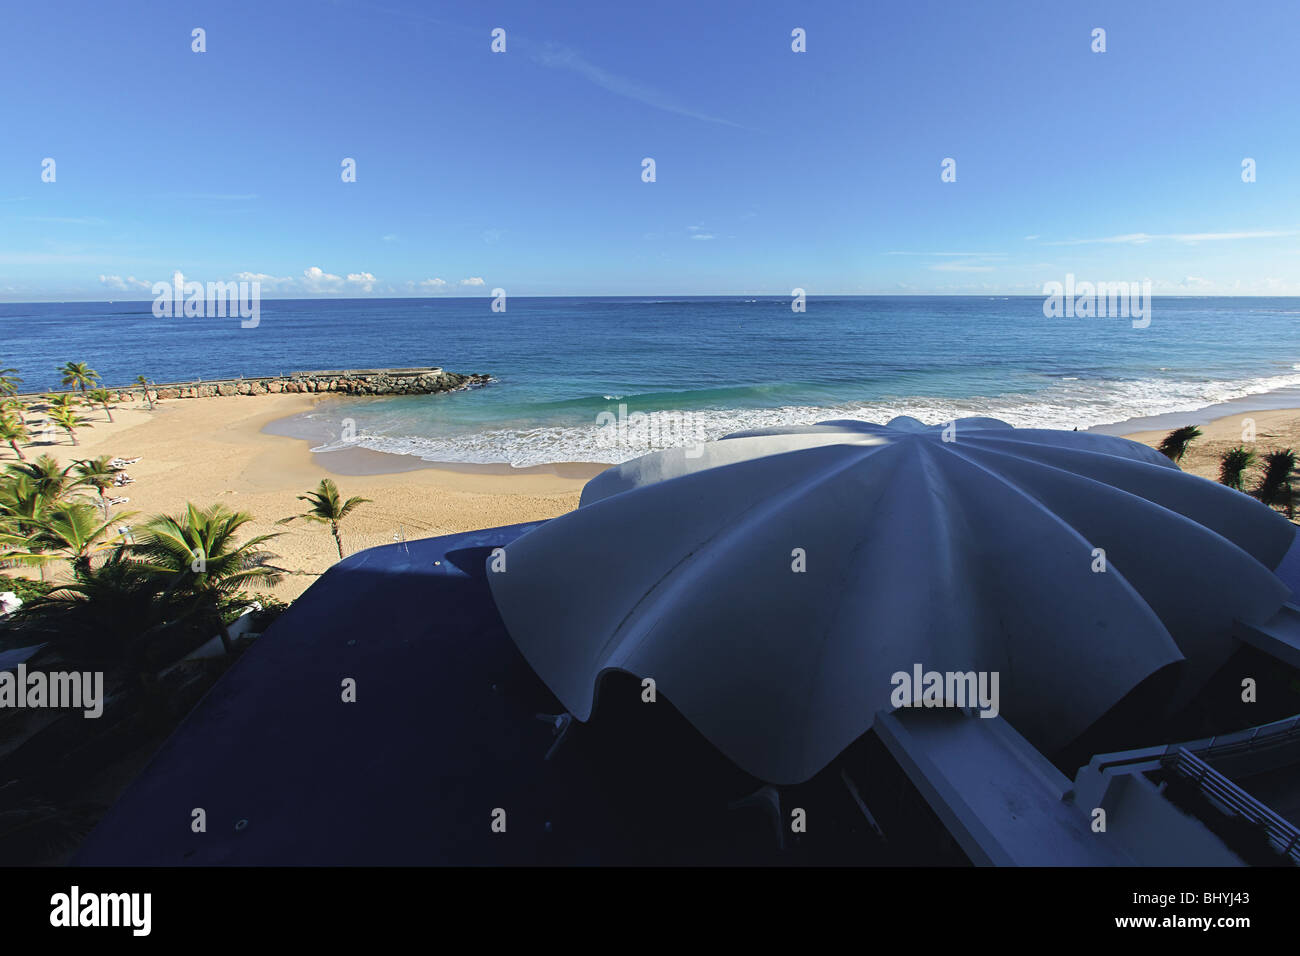 Beach View with a Clamshell Roof, La Concha Hotel, San Juan, Puerto Rico Stock Photo